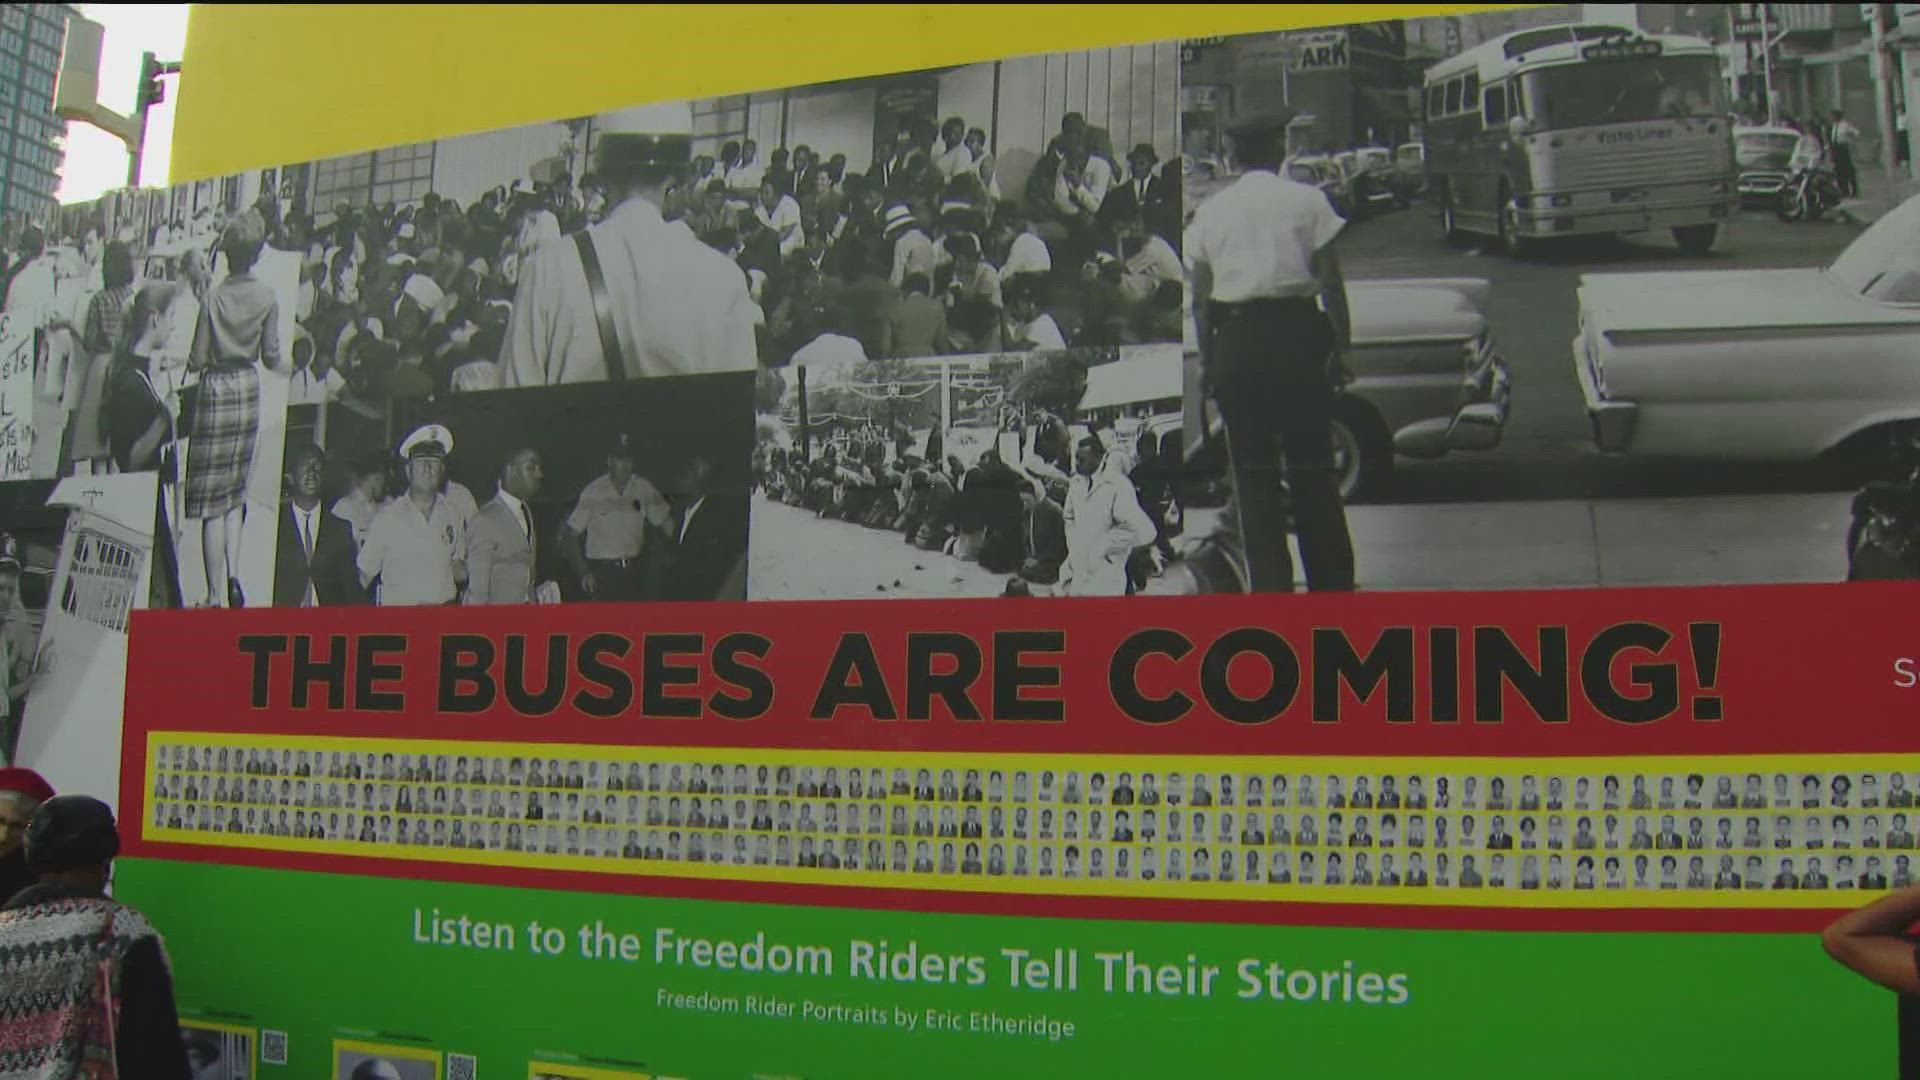 The Juneteenth events around San Diego, included one hosted by the African American Museum of Fine Art, which showcased a new exhibit highlighting the Freedom Riders